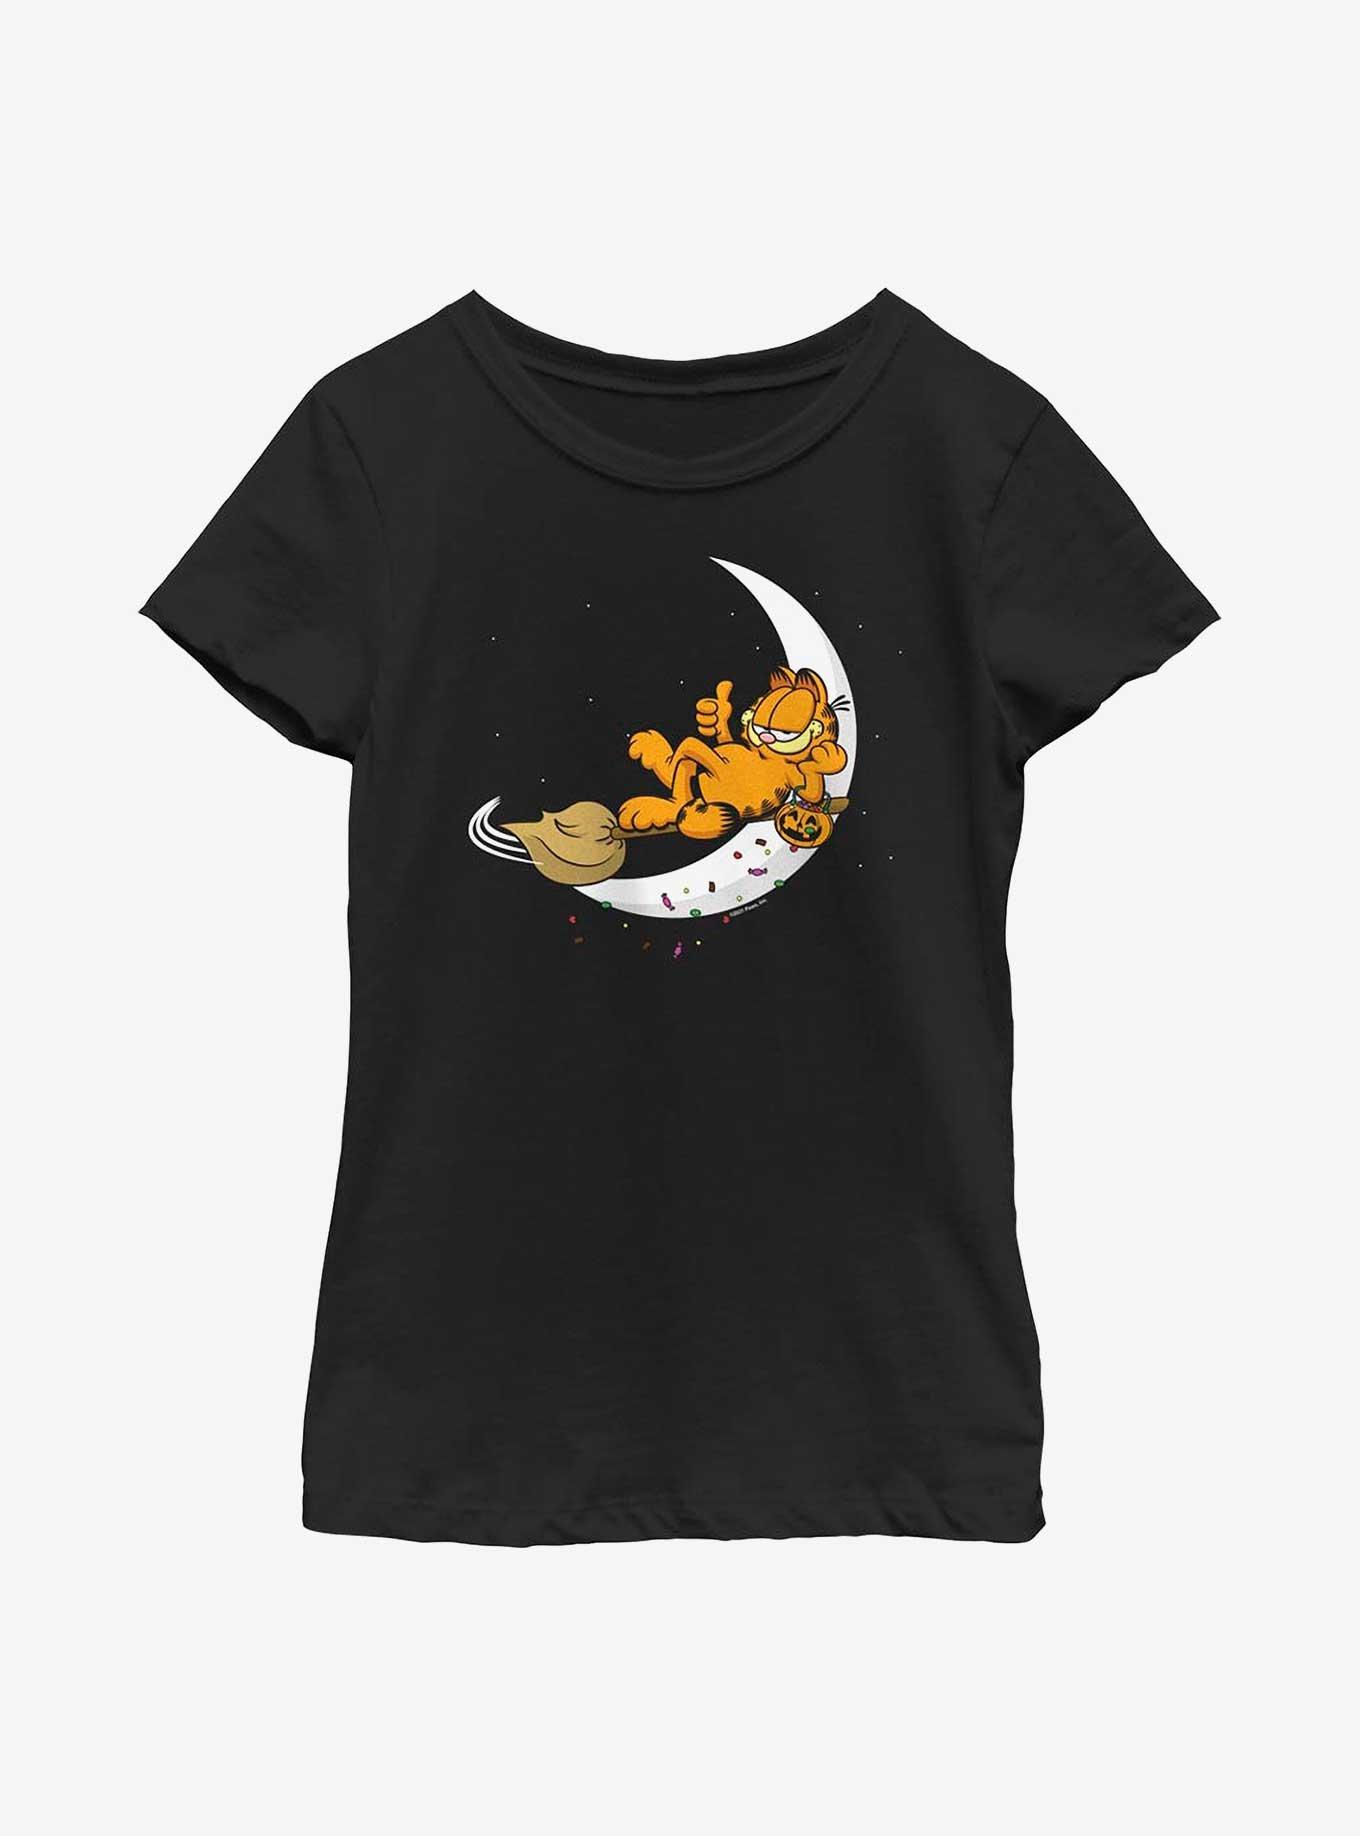 Garfield A Candy Cat Youth Girl's T-Shirt, BLACK, hi-res